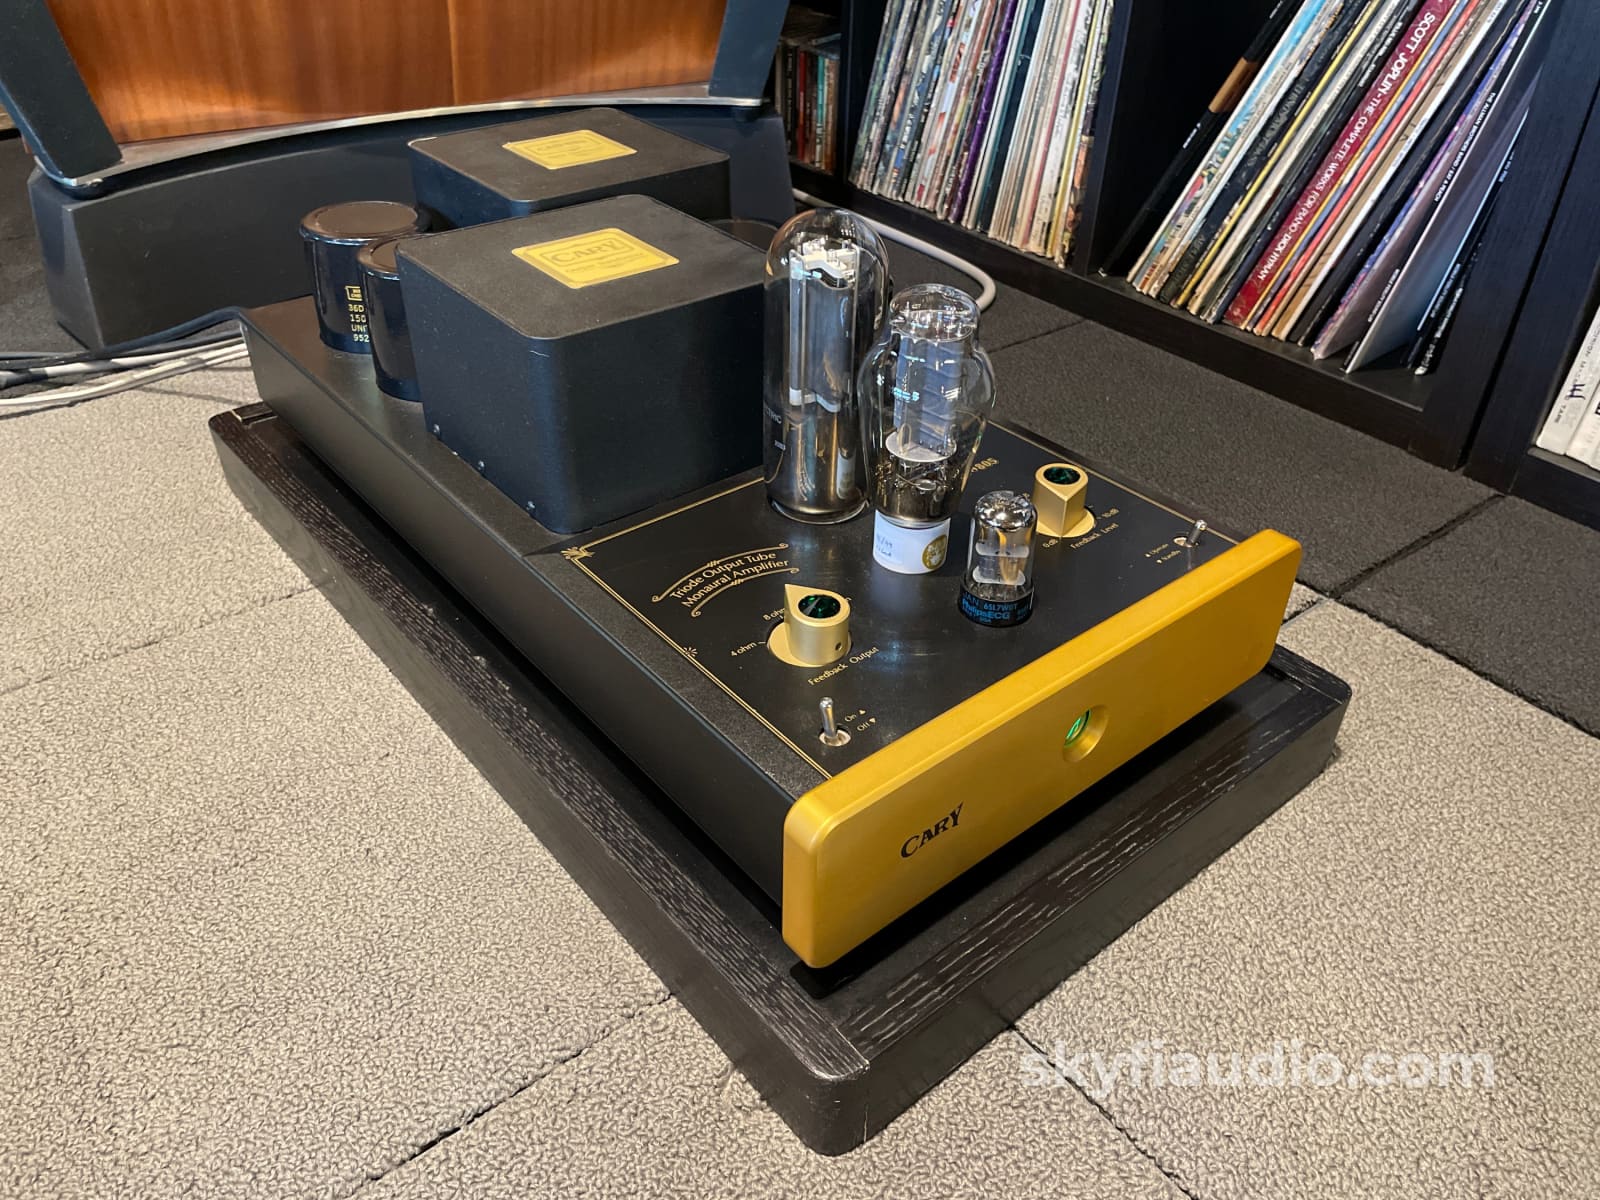 Cary Audio Design Cad-805 - Single-Ended Tube Monoblock Amplifiers With Matching Stands Amplifier